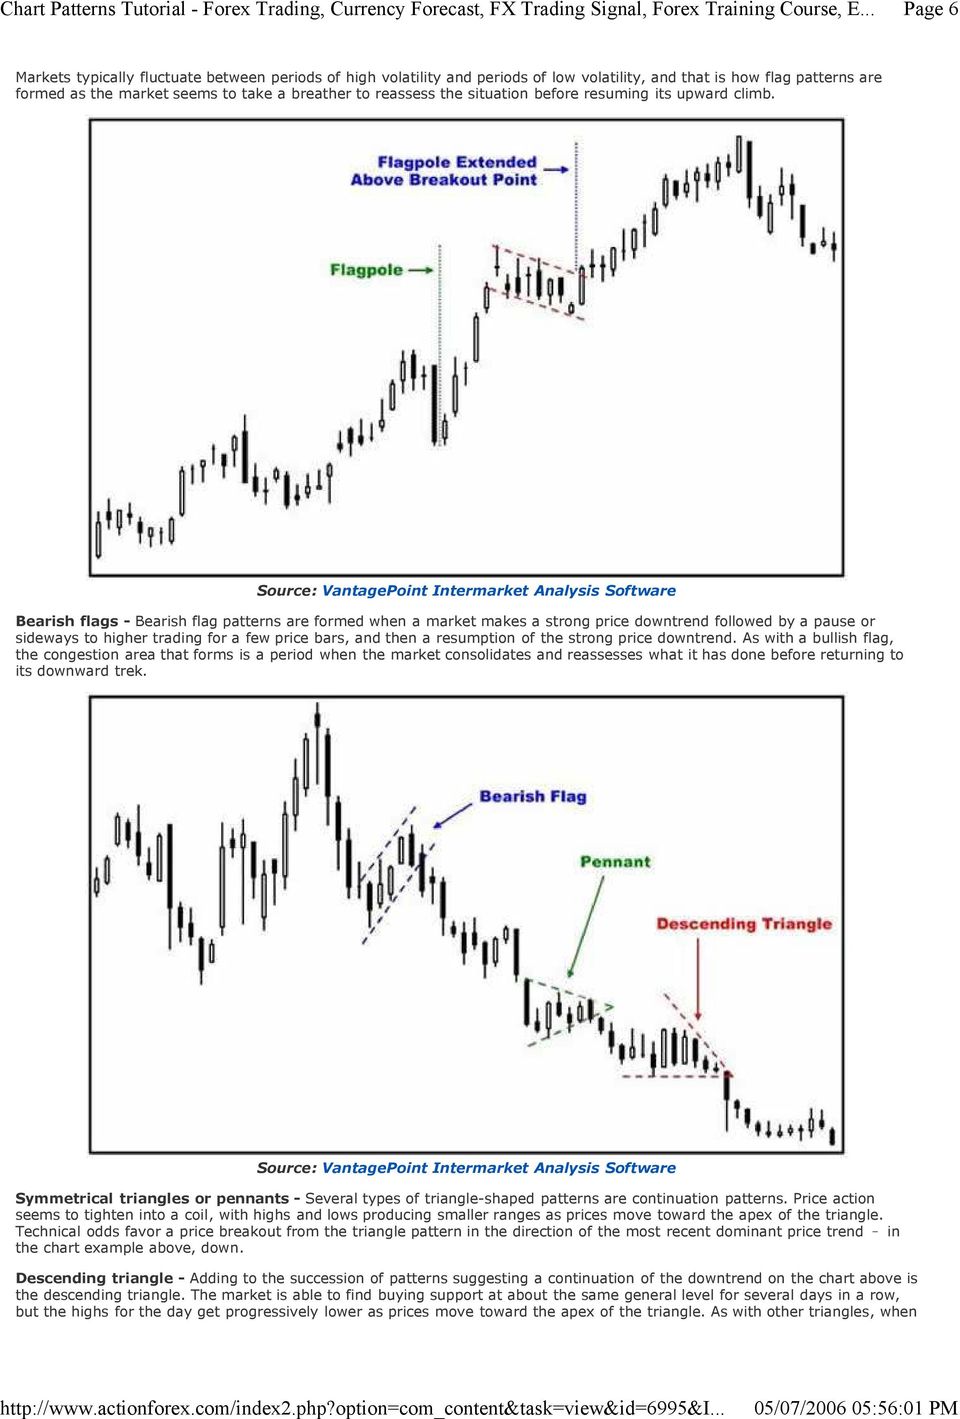 Bearish flags- Bearish flag patterns are formed when a market makes a strong price downtrend followed by a pause or sideways to higher trading for a few price bars, and then a resumption of the